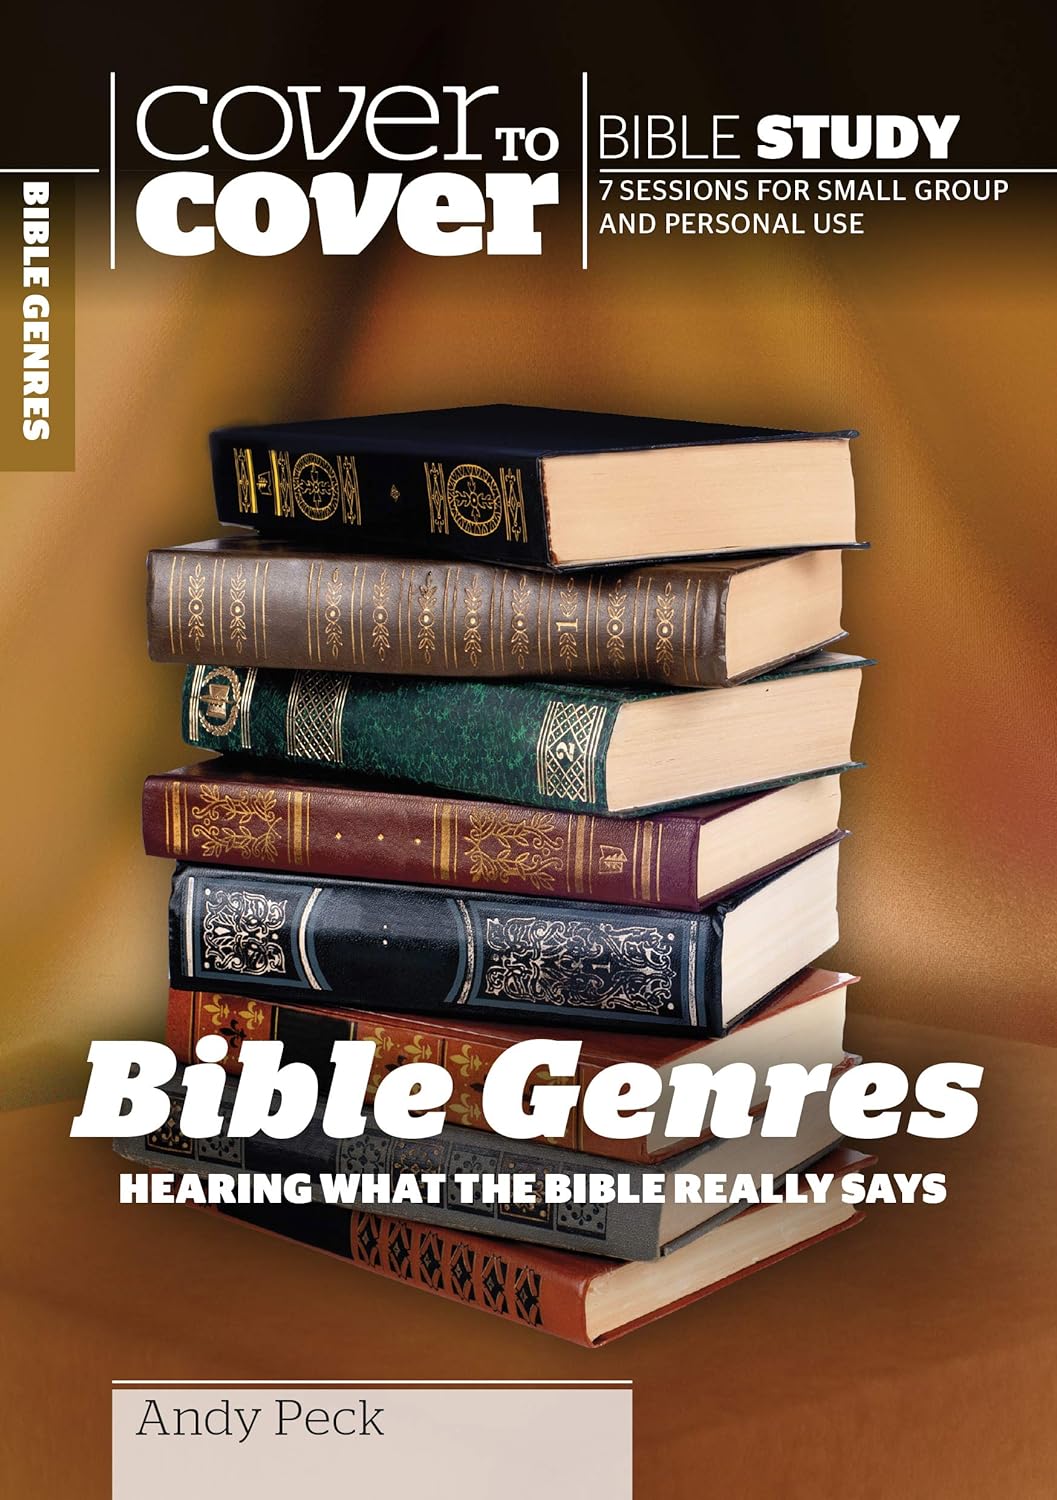 Bible Genres: Hearing What the Bible Really Says - Cover To Cover Bible Study Guide